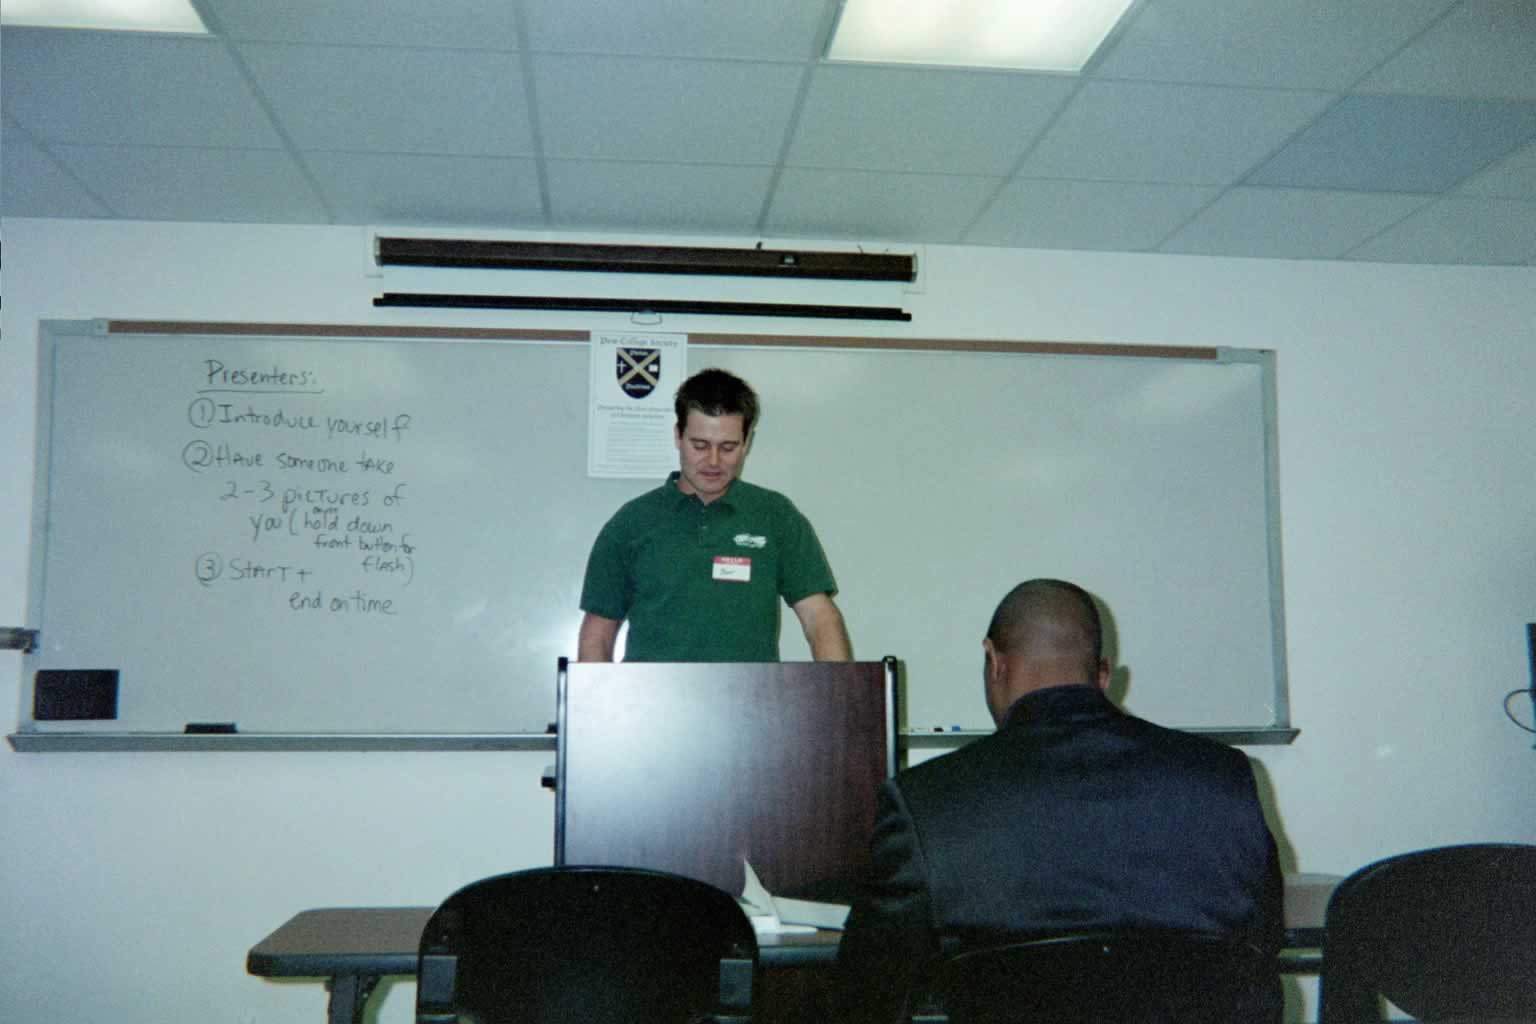 picture of a man standing behind a podium reading